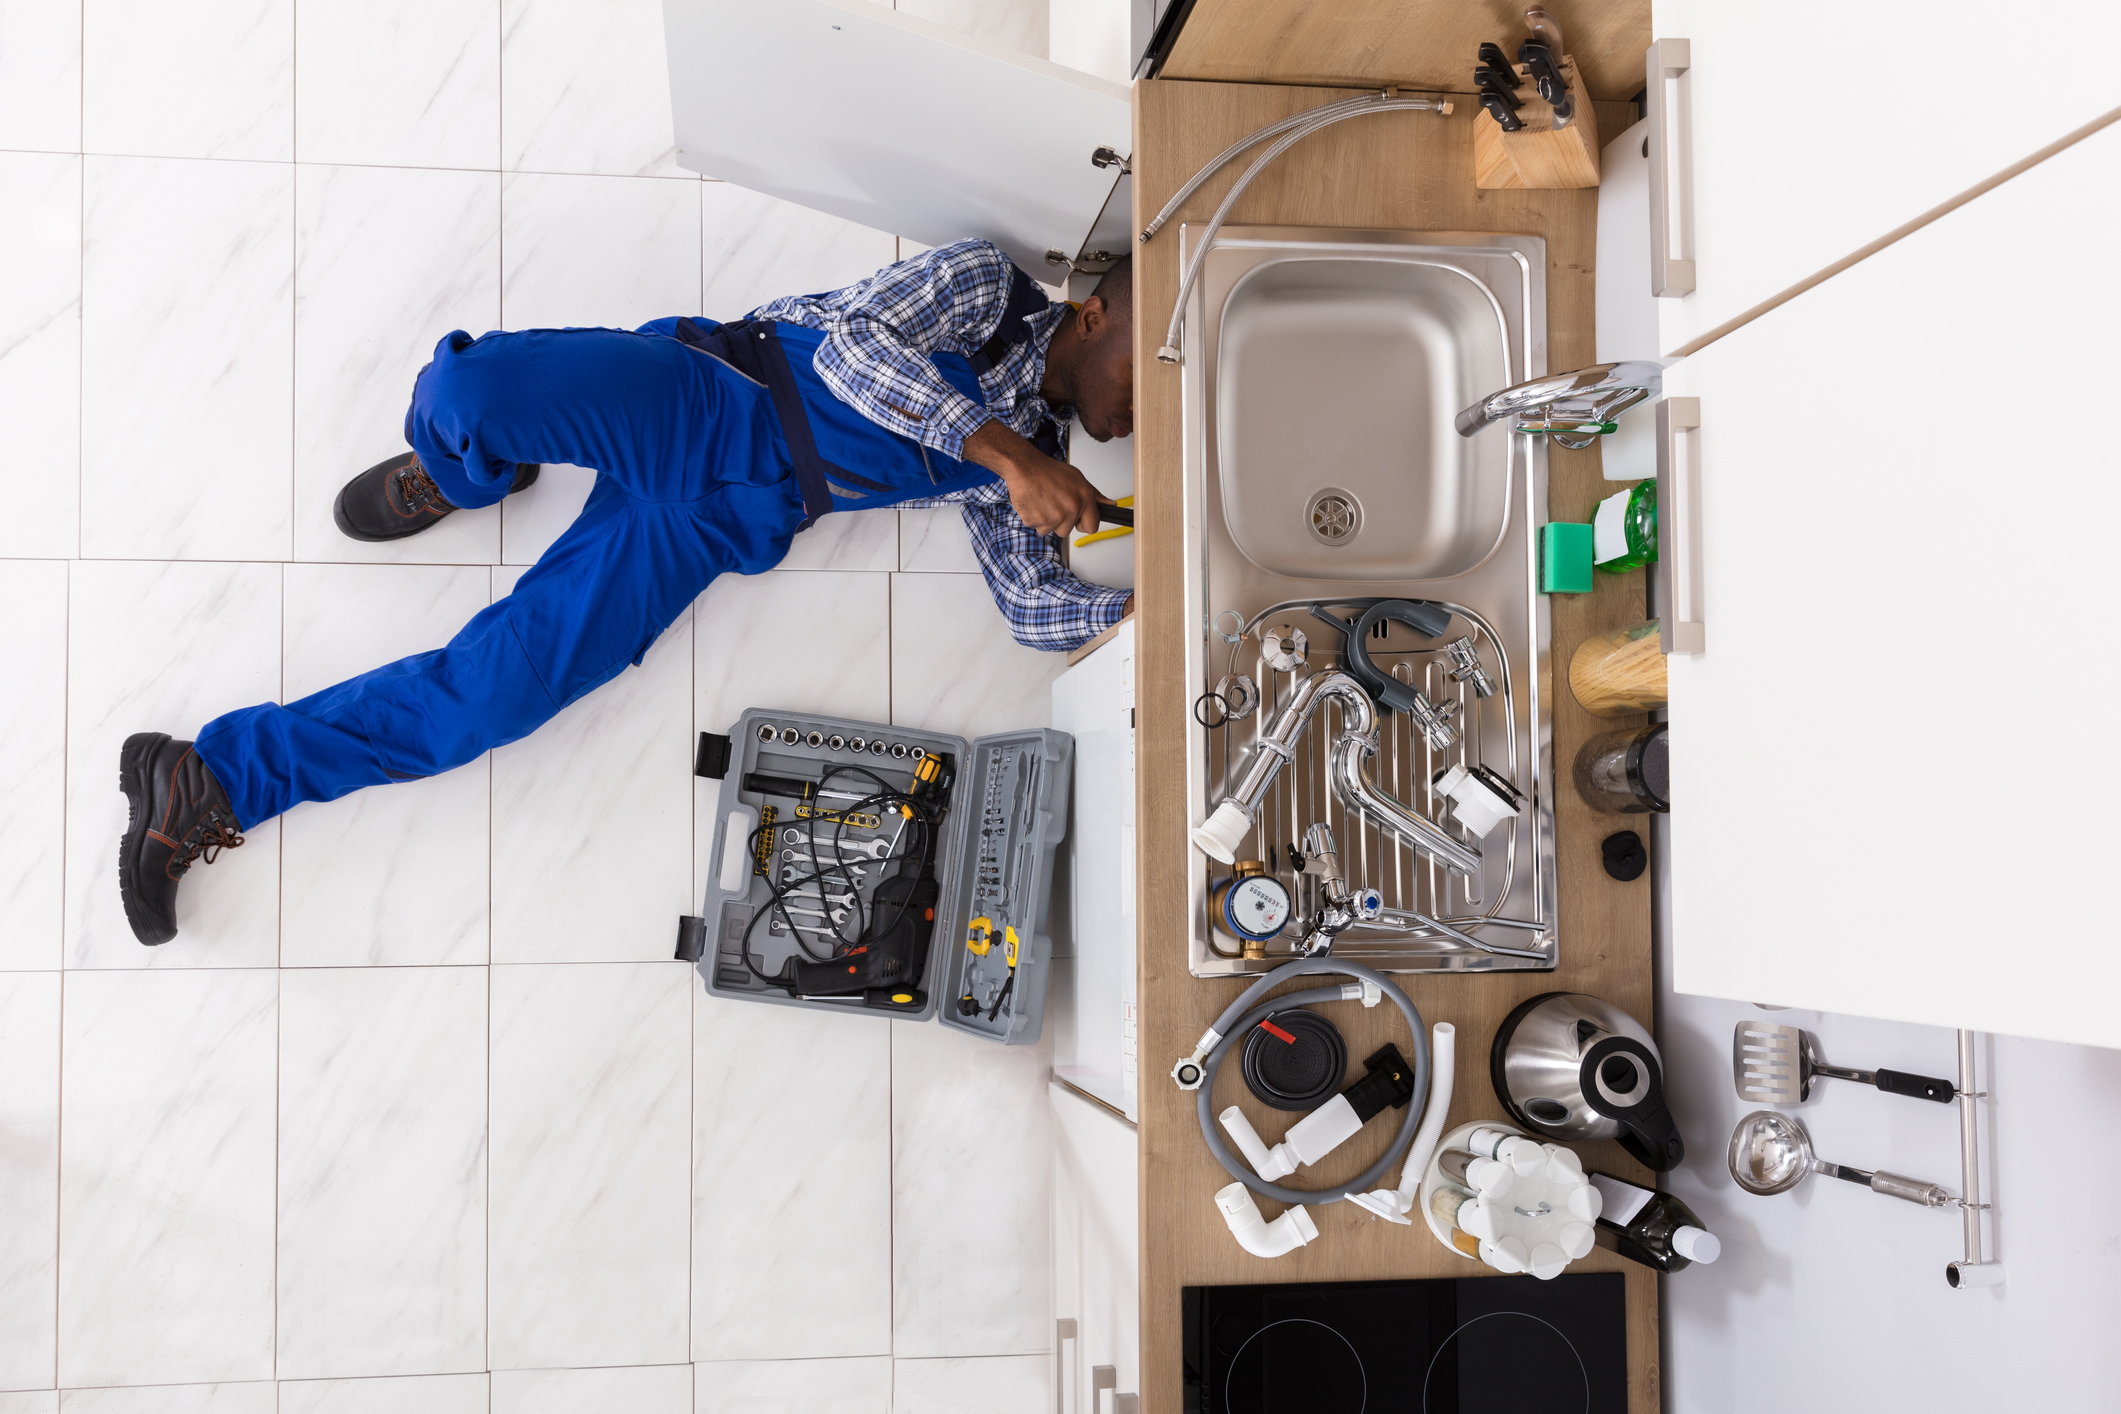 High Angle View Of Handyman Lying On Floor Repairing Sink In Kitchen With Toolbox